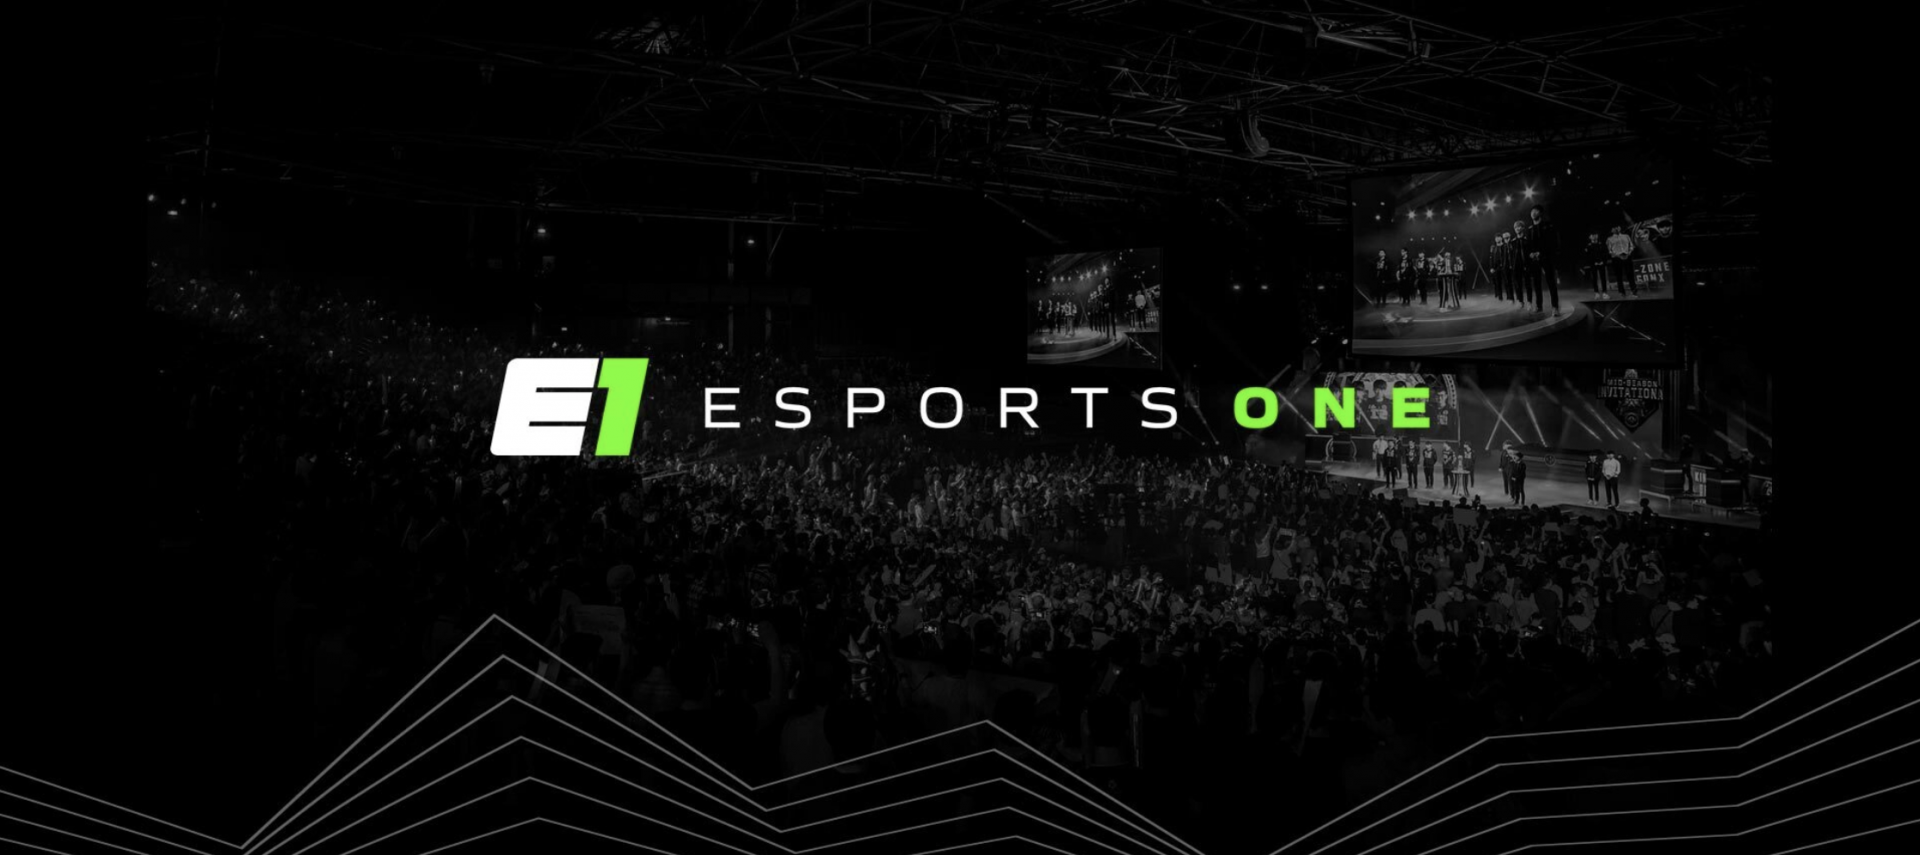 Esports One raises $4m in funding, looks to expand fantasy offering ...